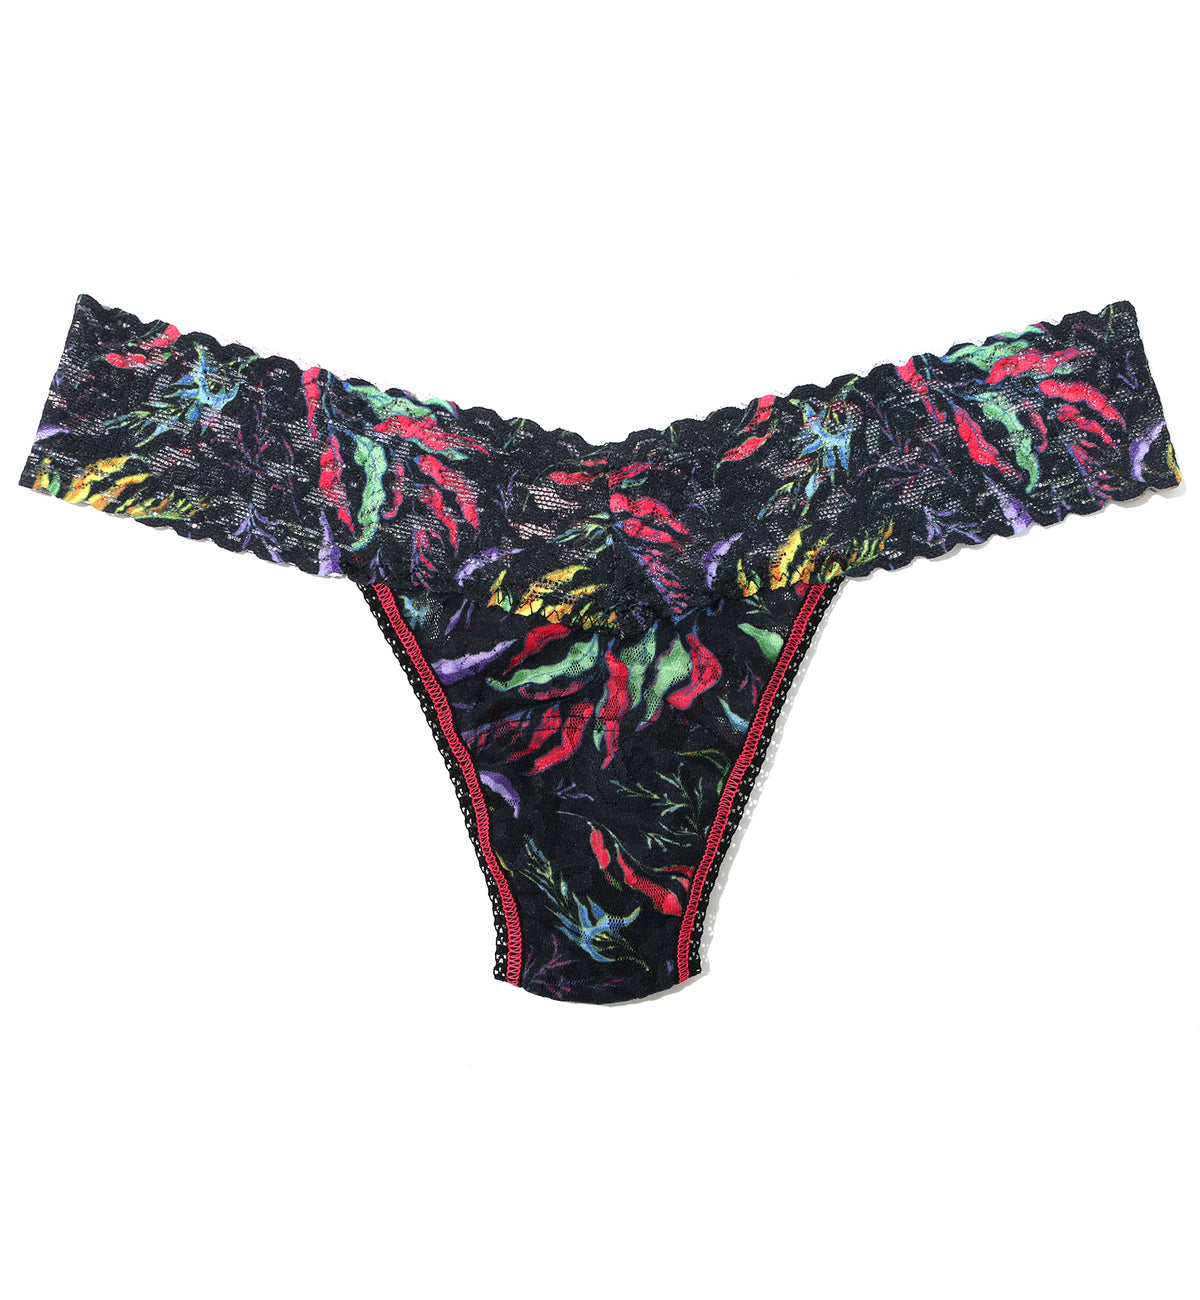 Hanky Panky Signature Lace Printed Low Rise Thong (PR4911P),Floating - Floating,One Size